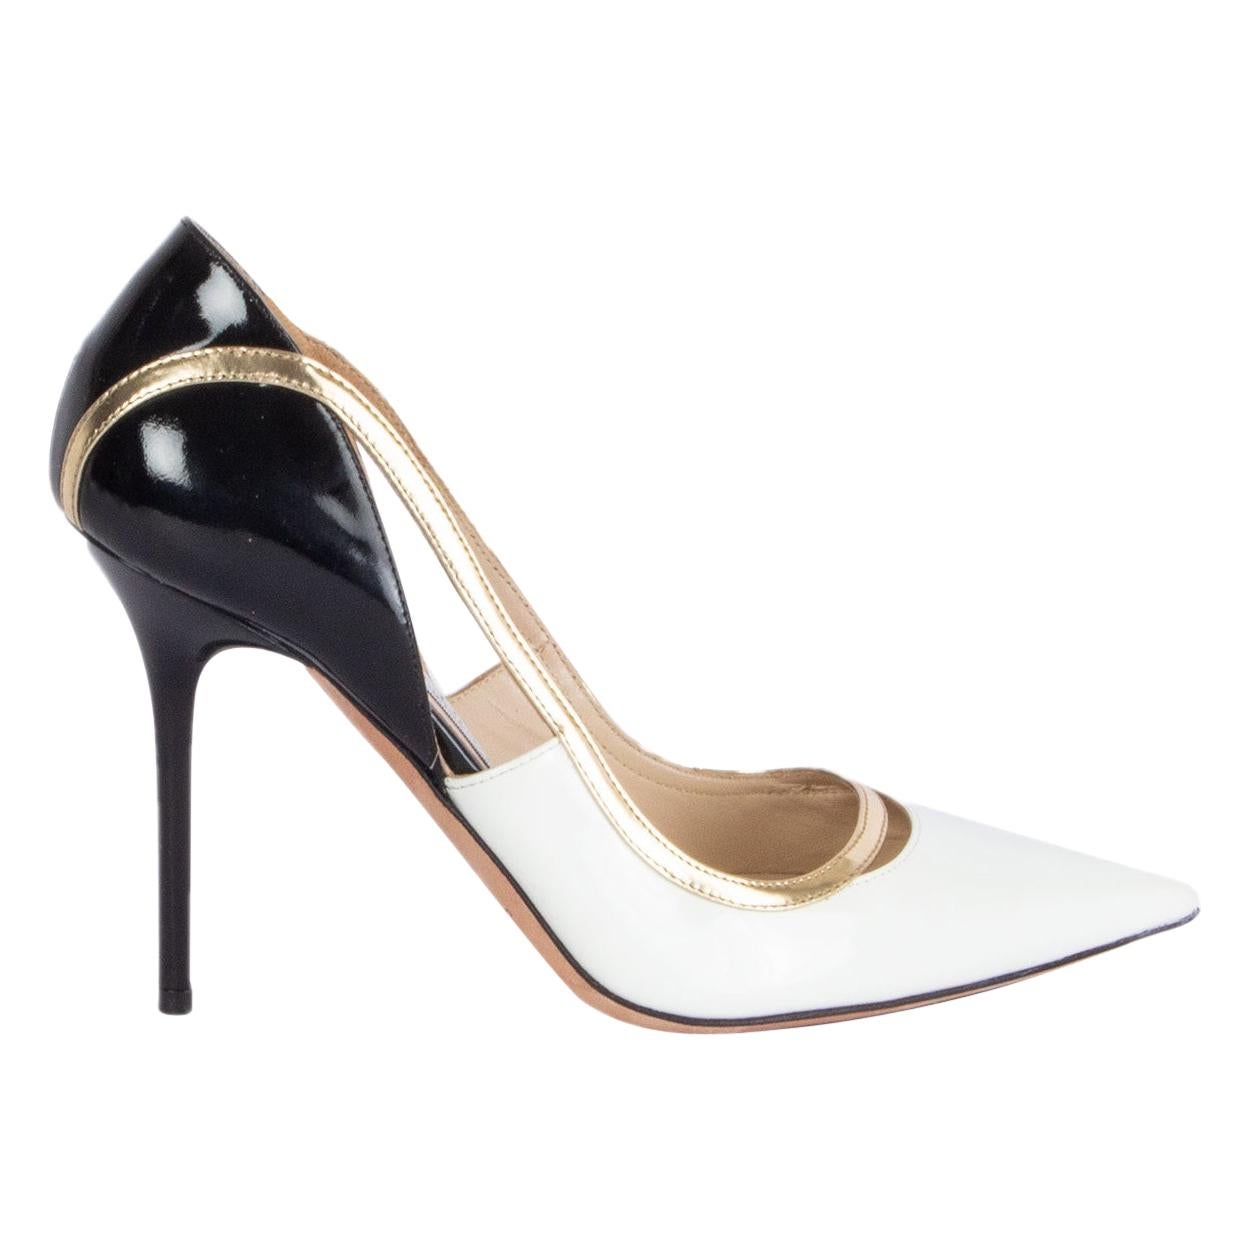 JIMMY CHOO white black gold patent leather VIPER Pumps Shoes 36